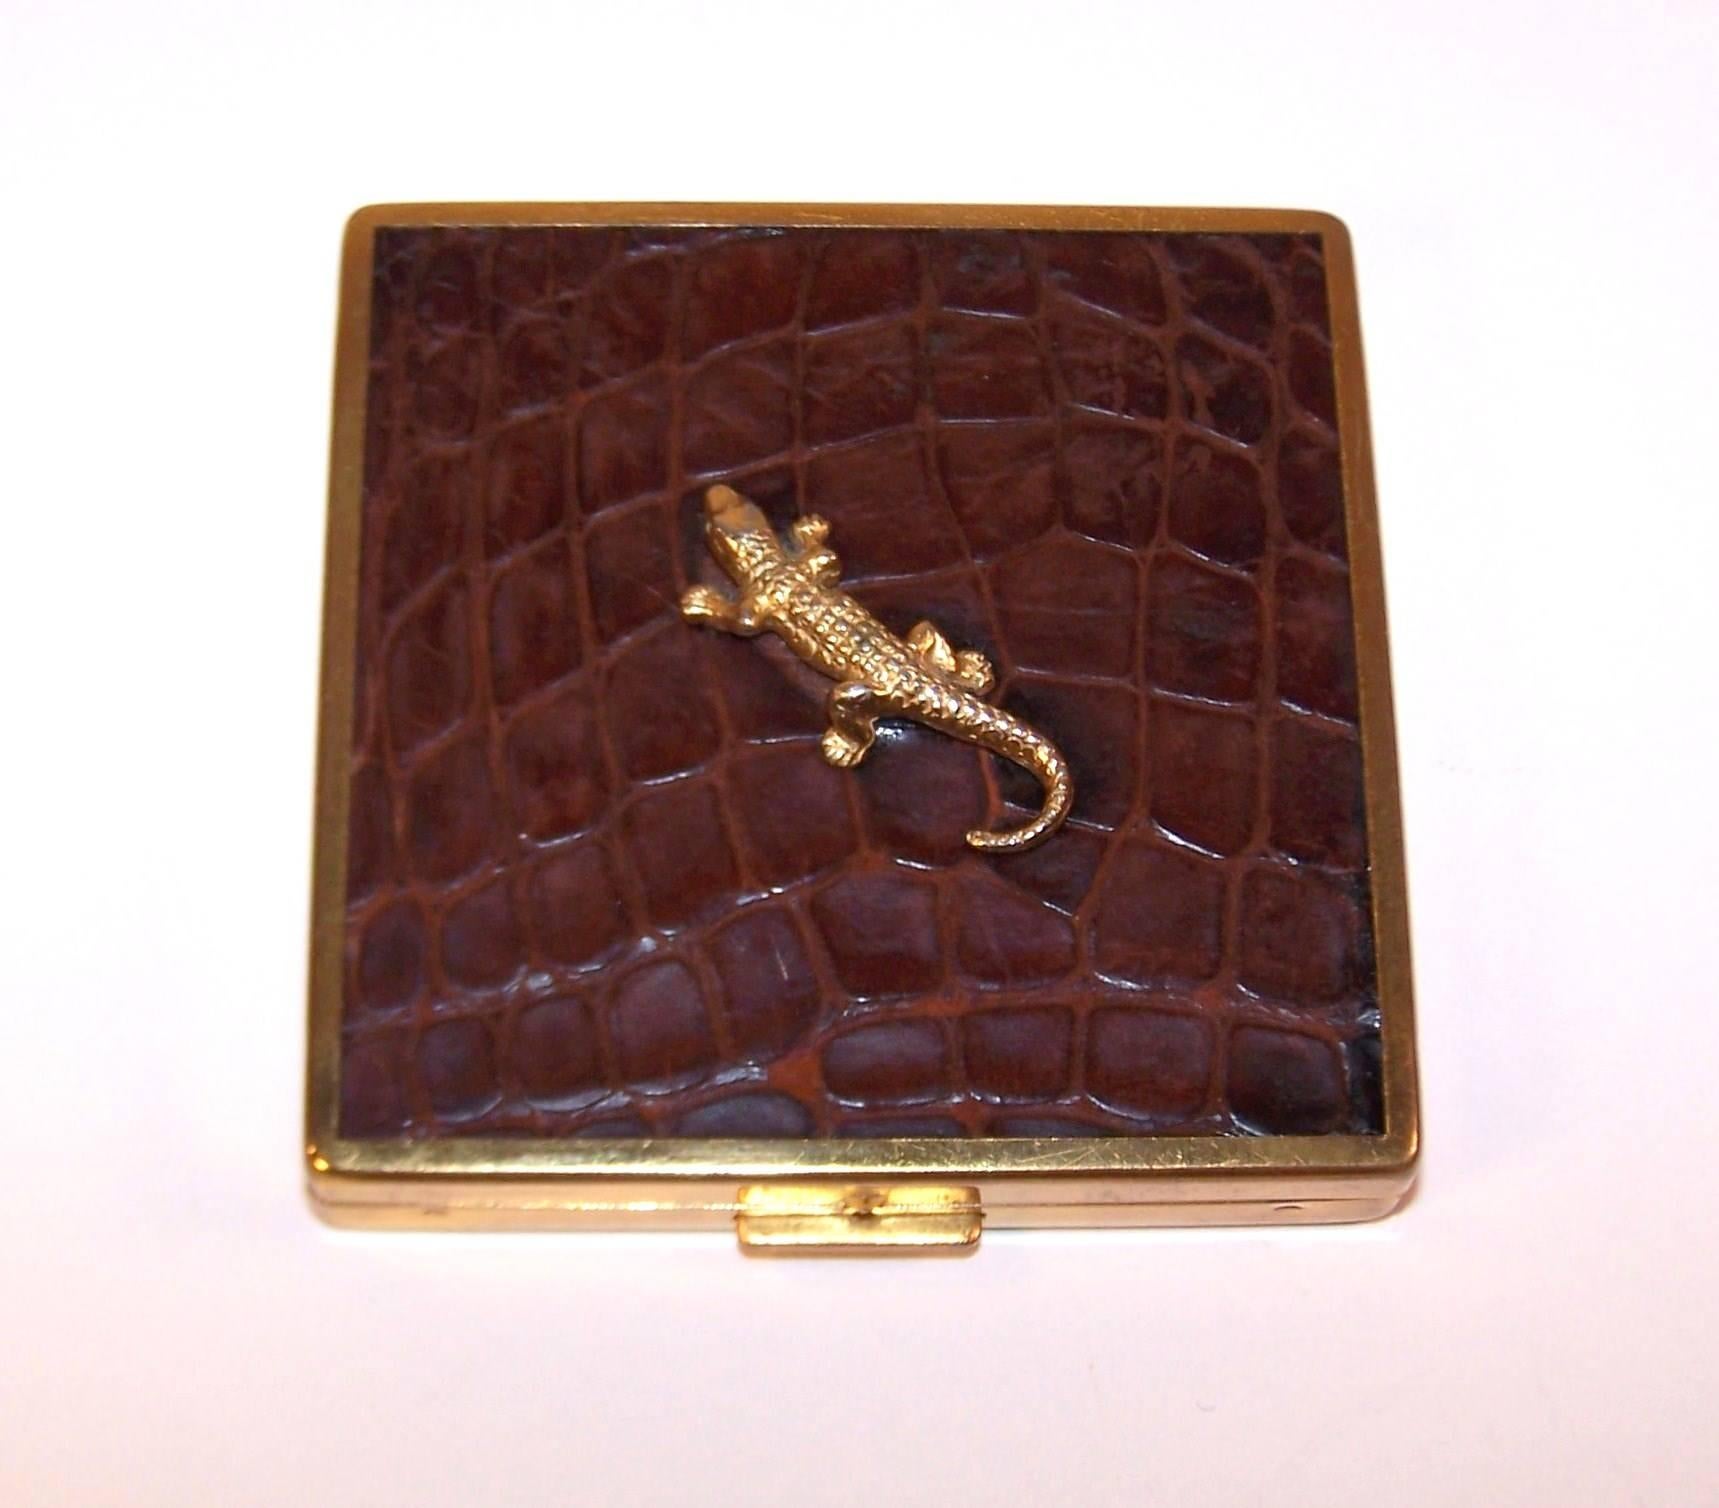 Brown Alligators Abound 1950's Ciner Leather Covered Powder Compact With Lipstick